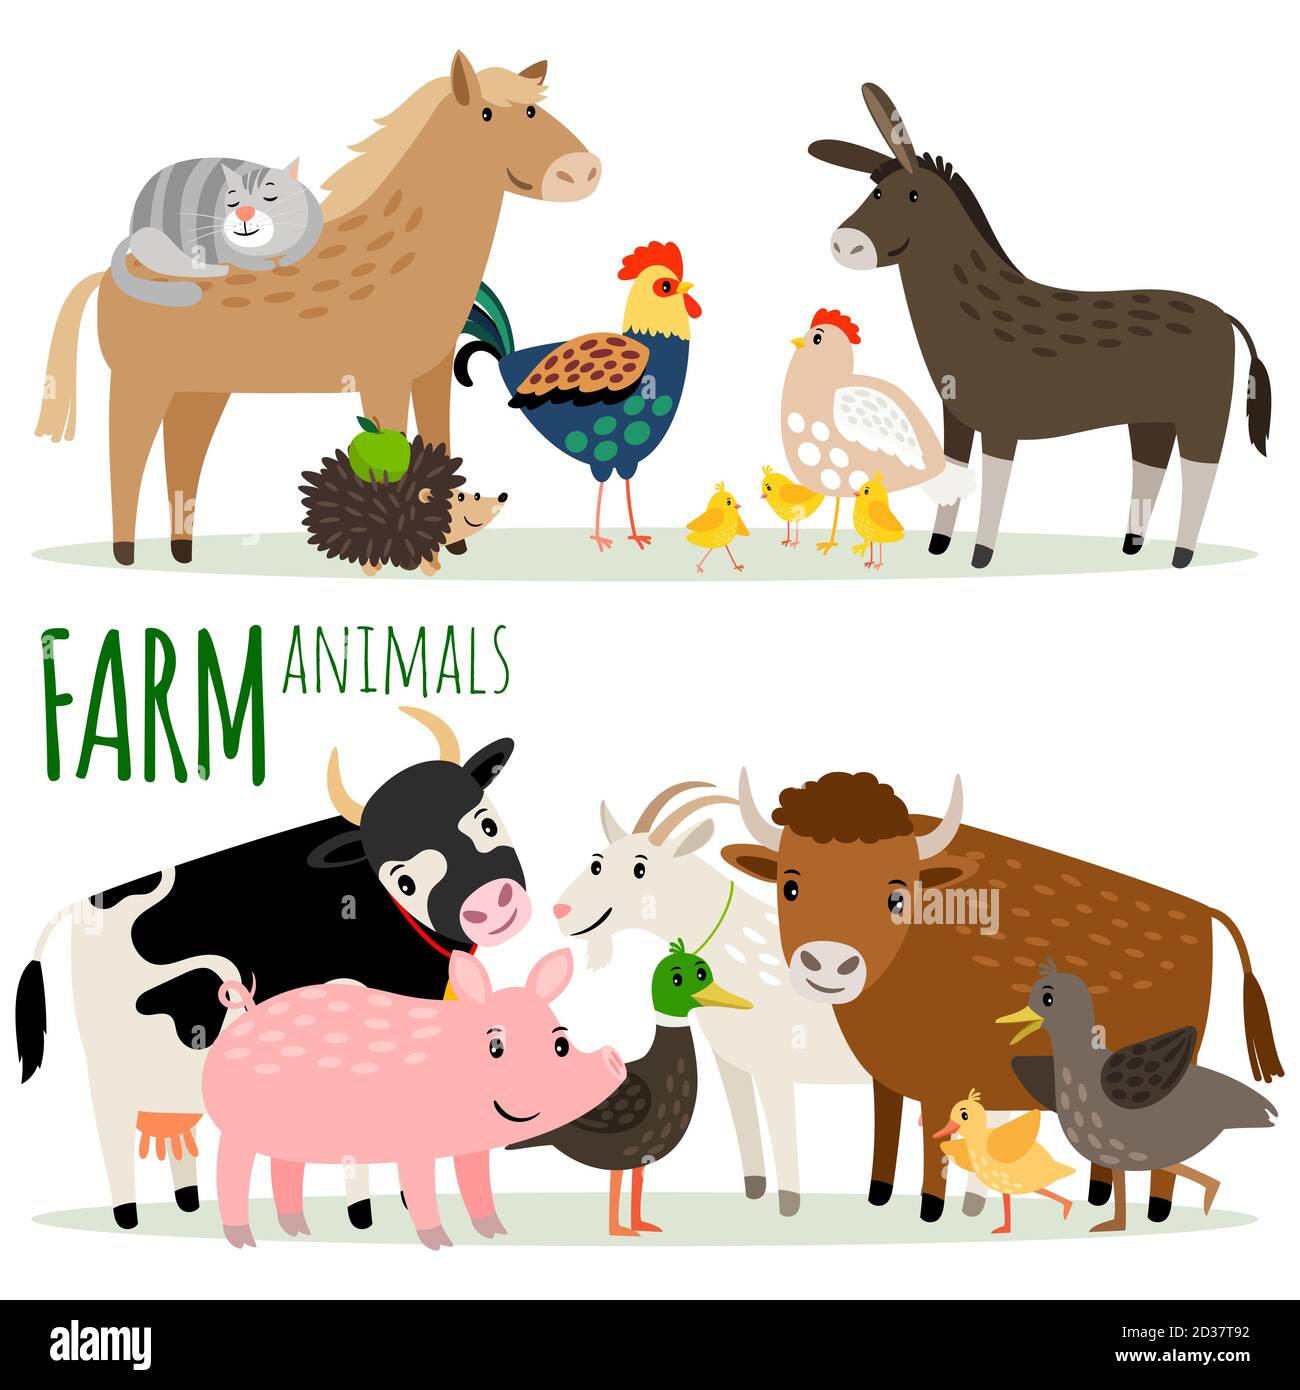 Farm animals cartoon characters vector groups isolated on white background Stock Vector